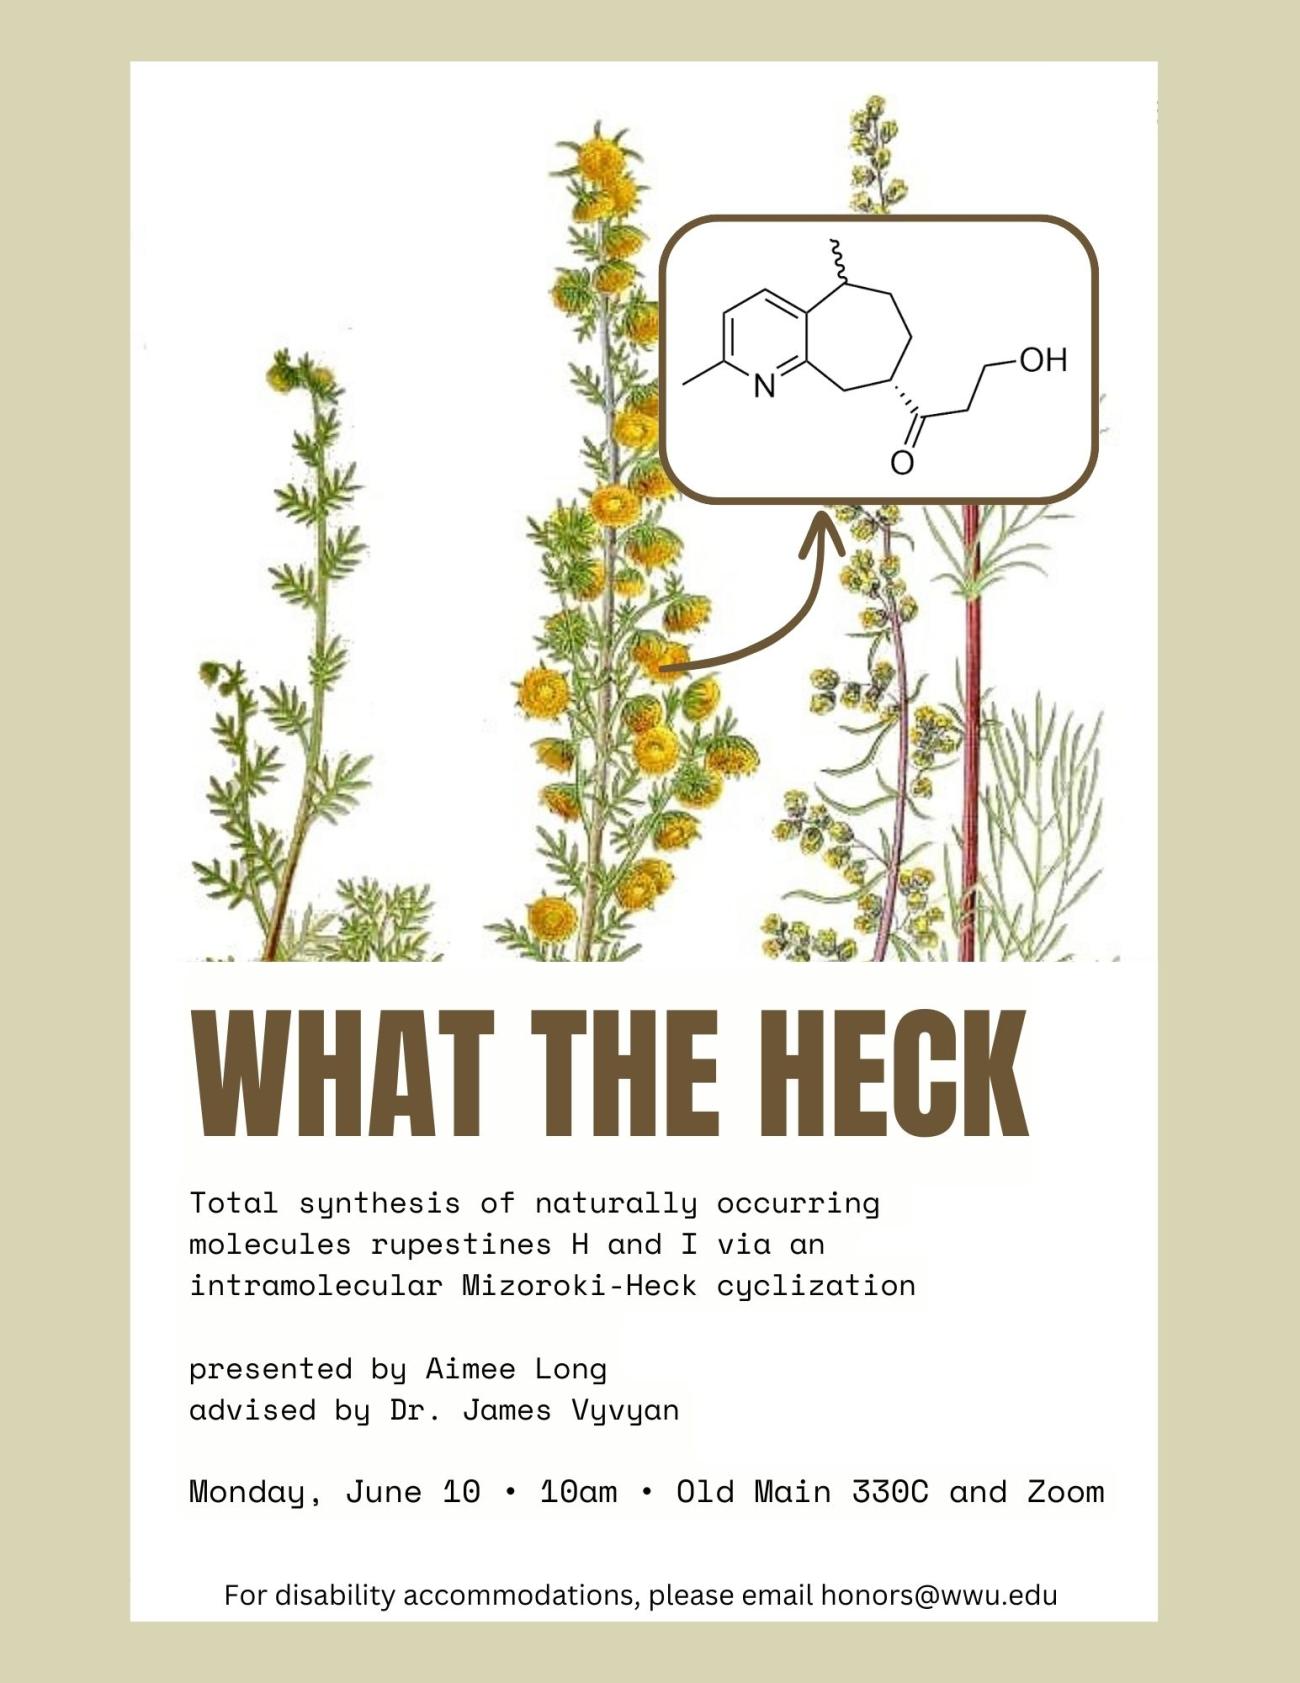 Plant drawings against a white background with a beige border. There is an organic molecule in a box which points to a plant. Text reads "What the Heck. Total synthesis of naturally occurring molecules rupestines H and I via an intramolecular Mizoroki-Heck cyclization. Presented by Aimee Long, advised by Dr. James Vyvyan. Monday, June 10; 10am; Old Main 330C and Zoom. For disability accommodations, please email honors@wwu.edu."